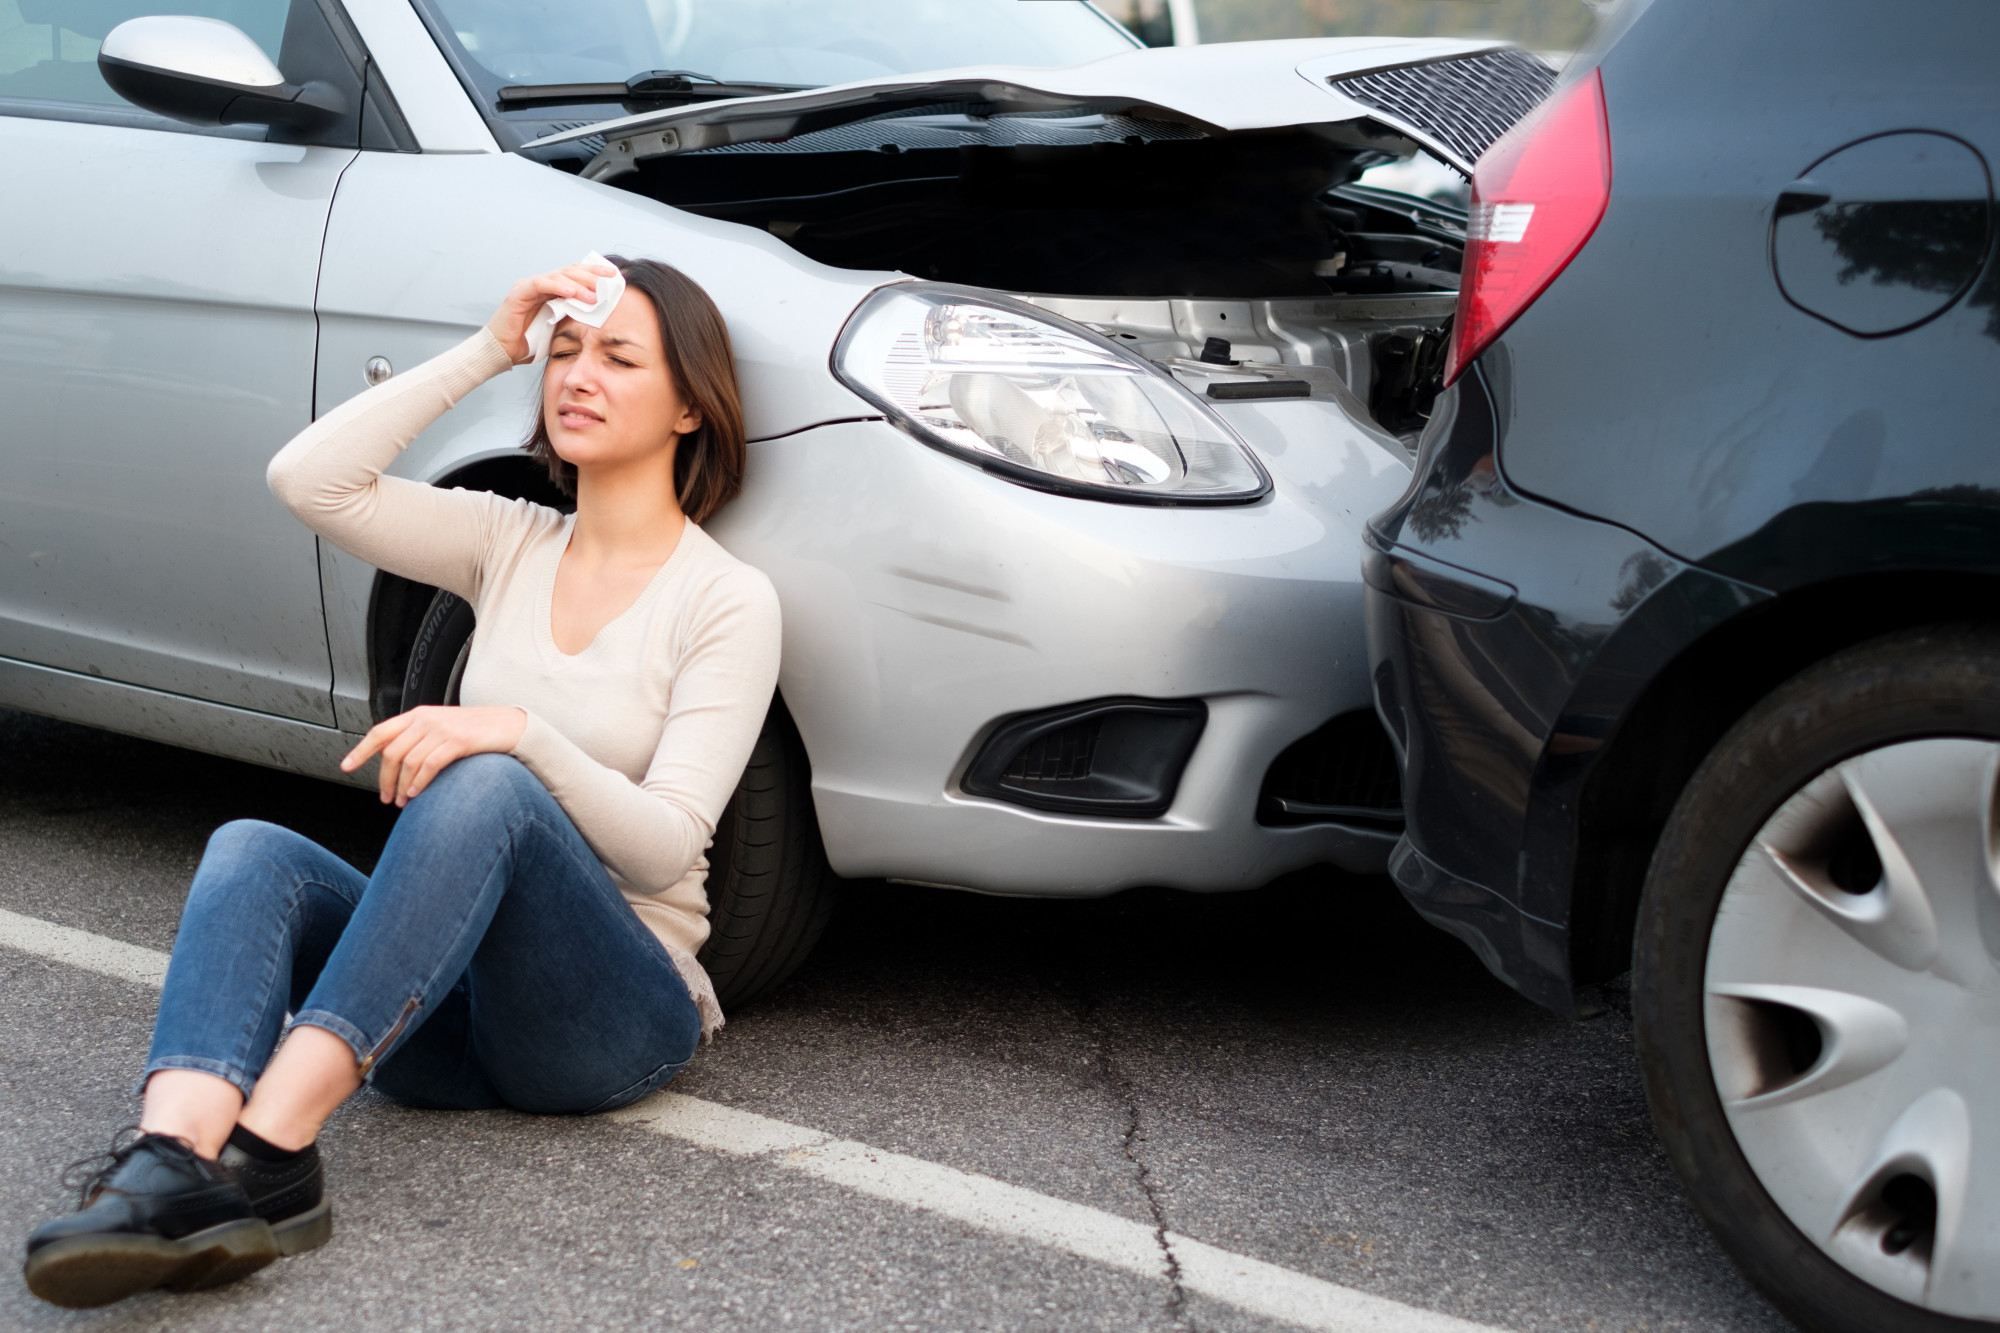 Is The Significance Of Hiring An Expert To Restore Your Car After An Accident?